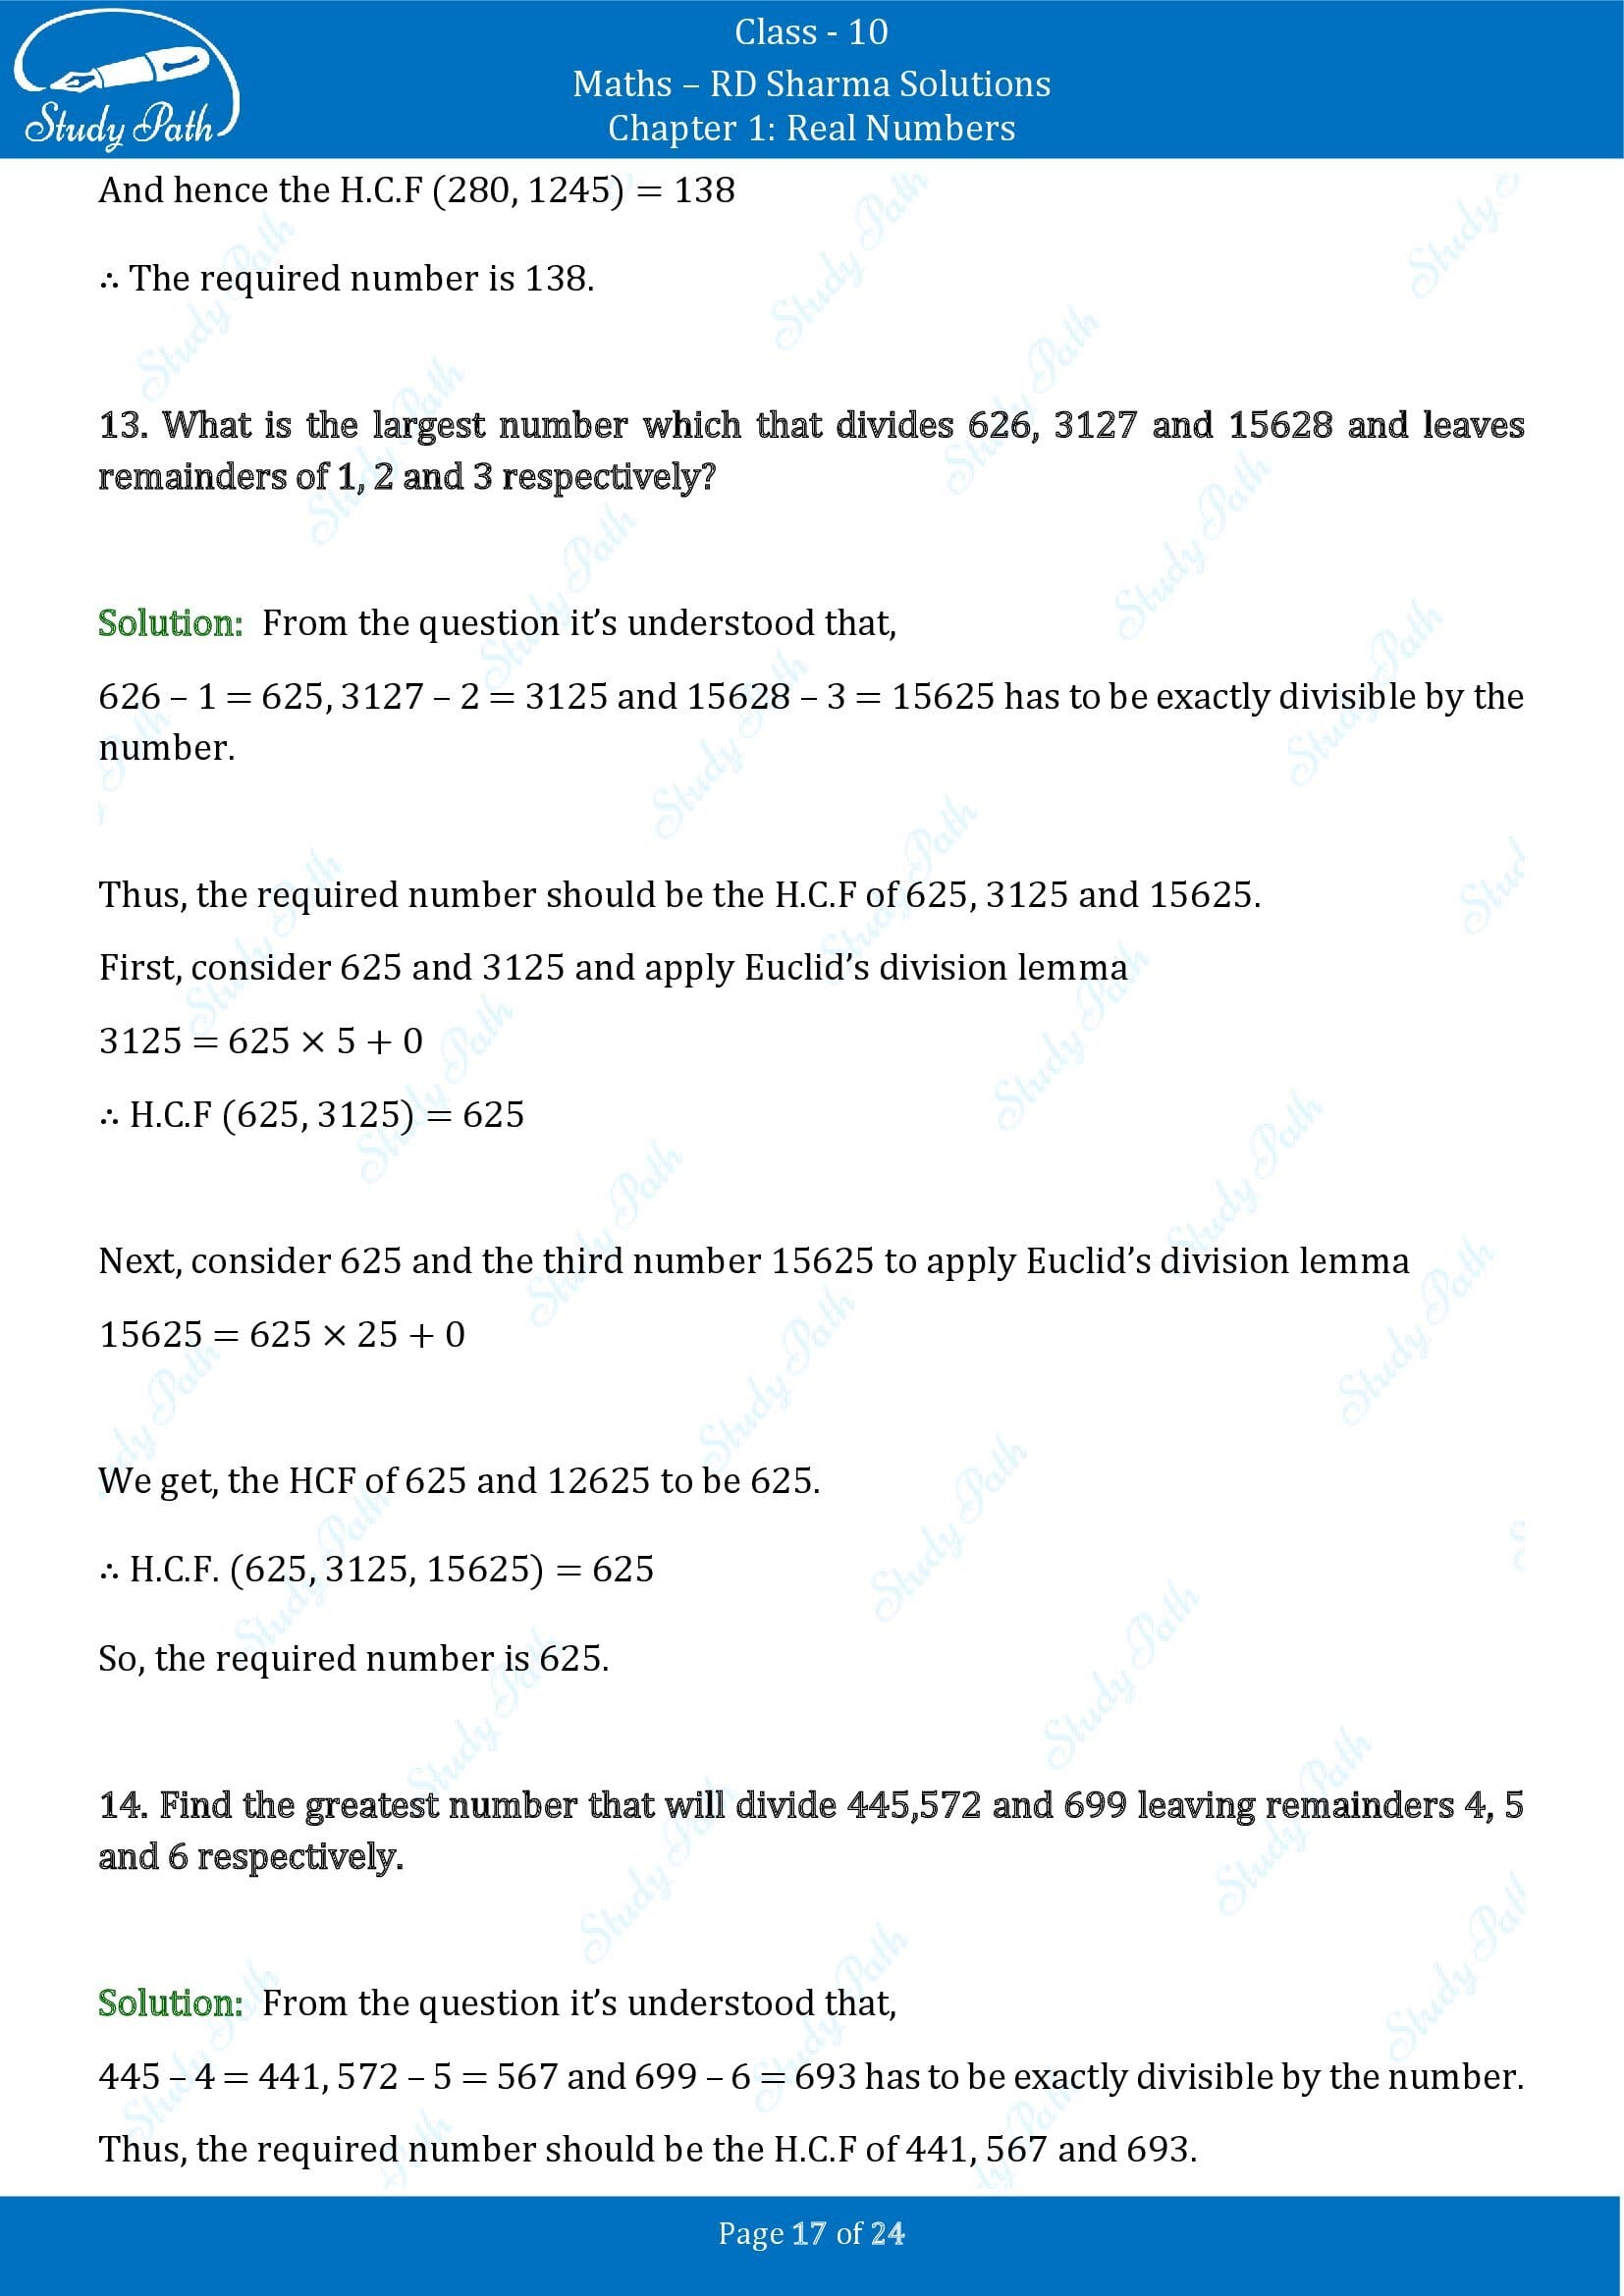 RD Sharma Solutions Class 10 Chapter 1 Real Numbers Exercise 1.2 00017